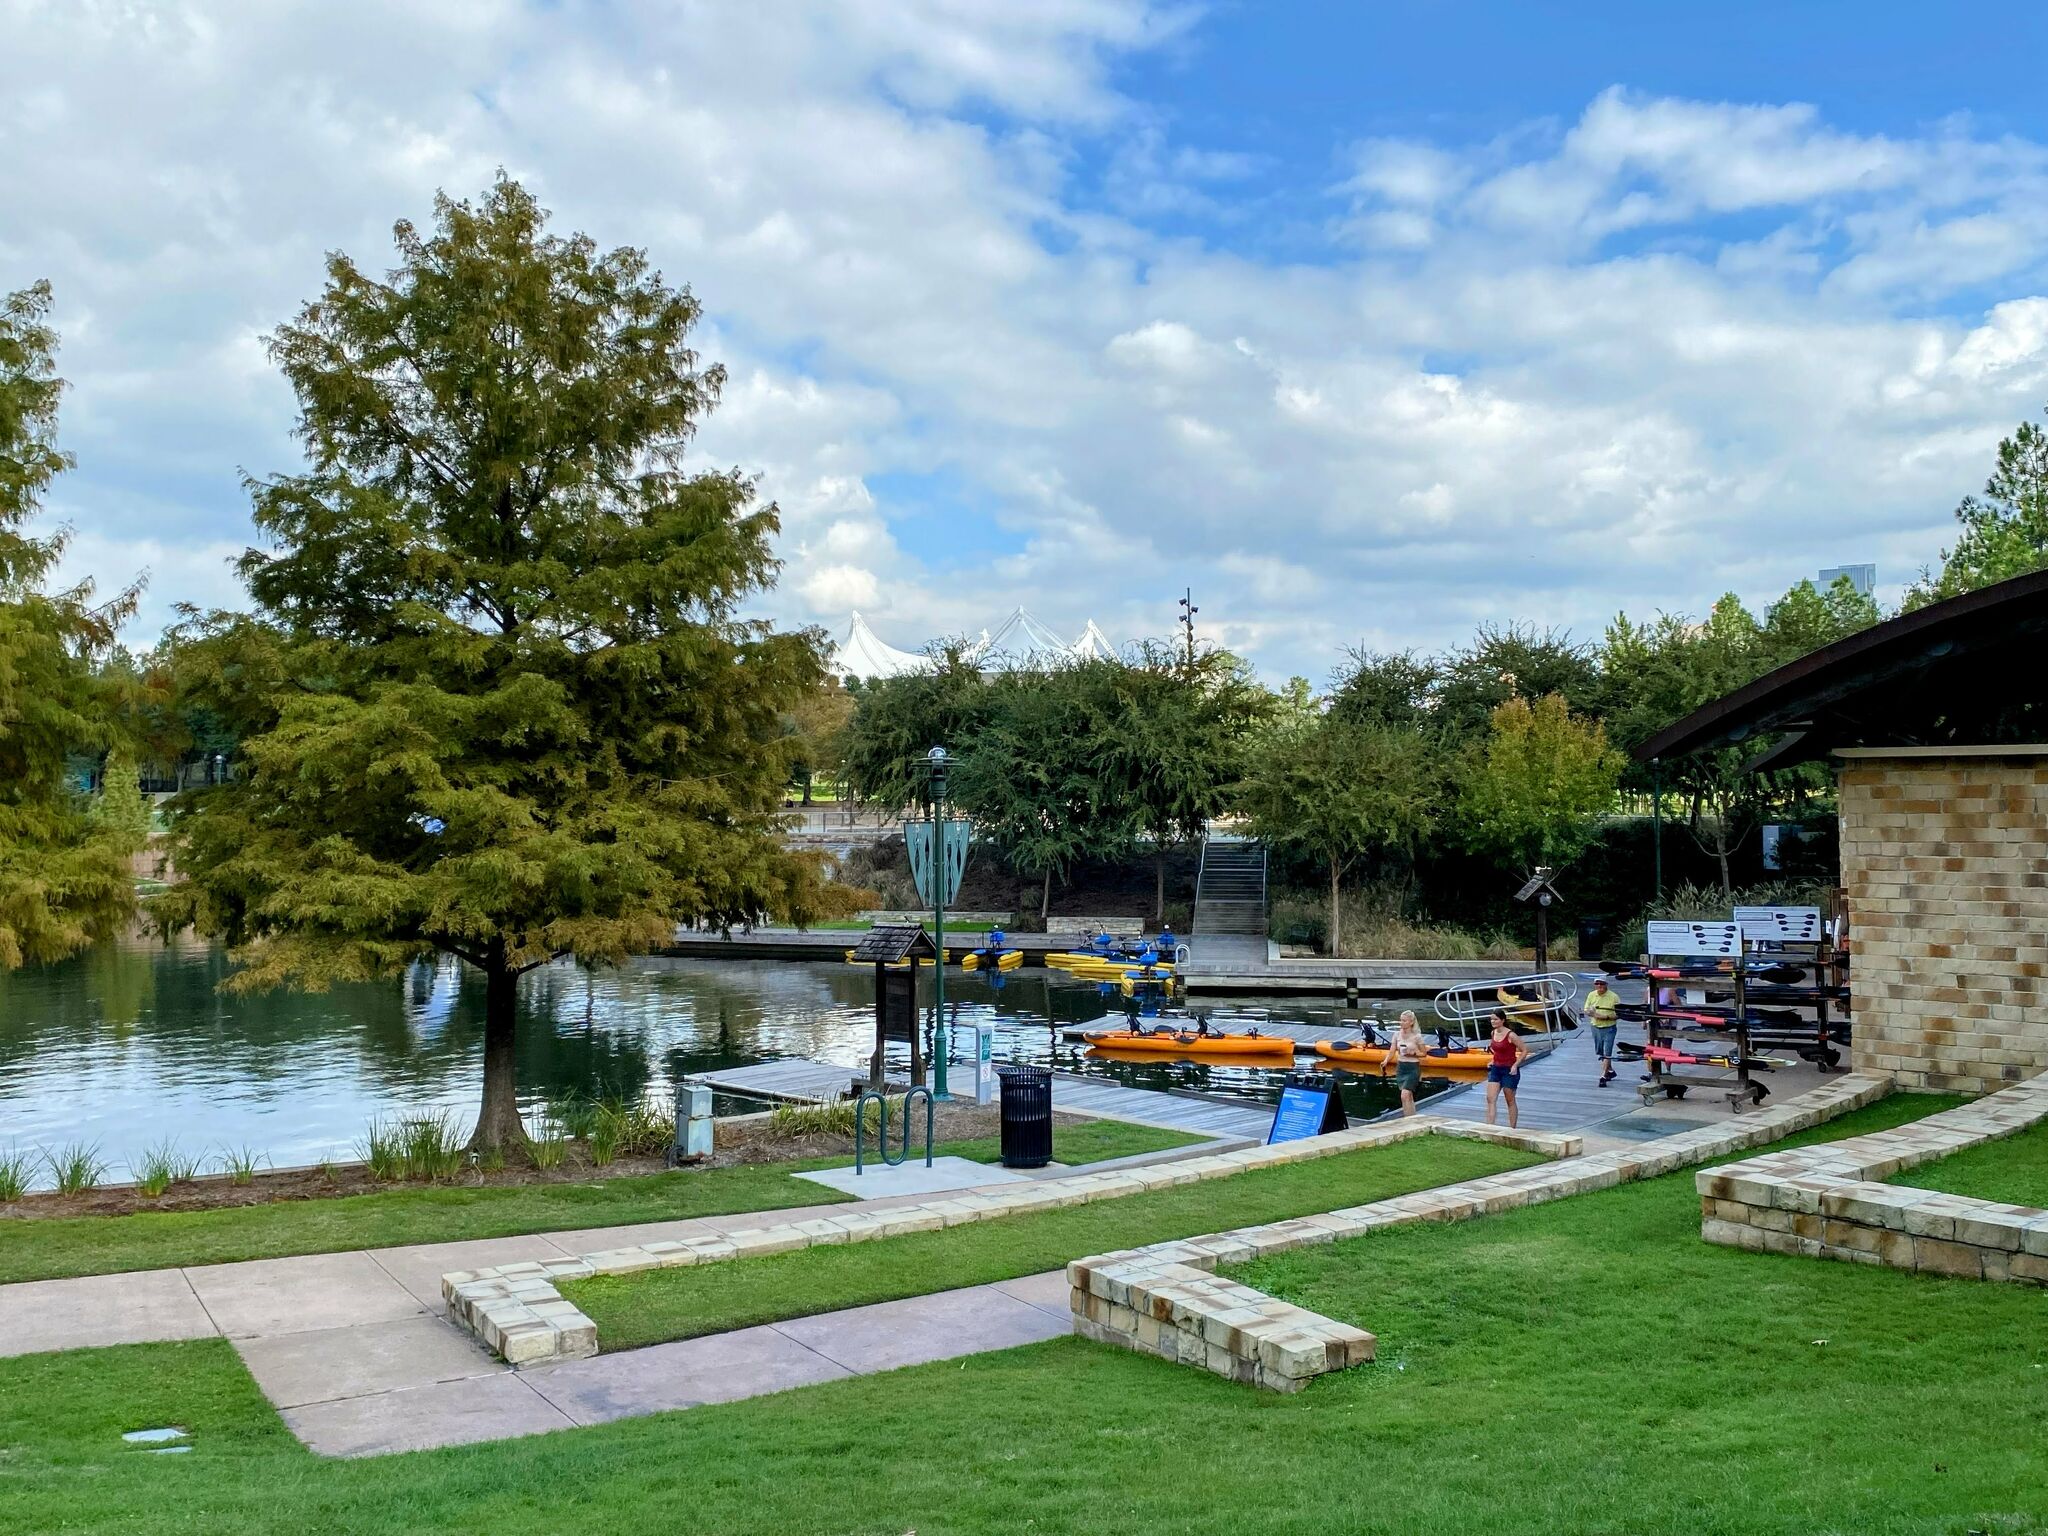 11 Awesome Things To Do in the Woodlands, Texas